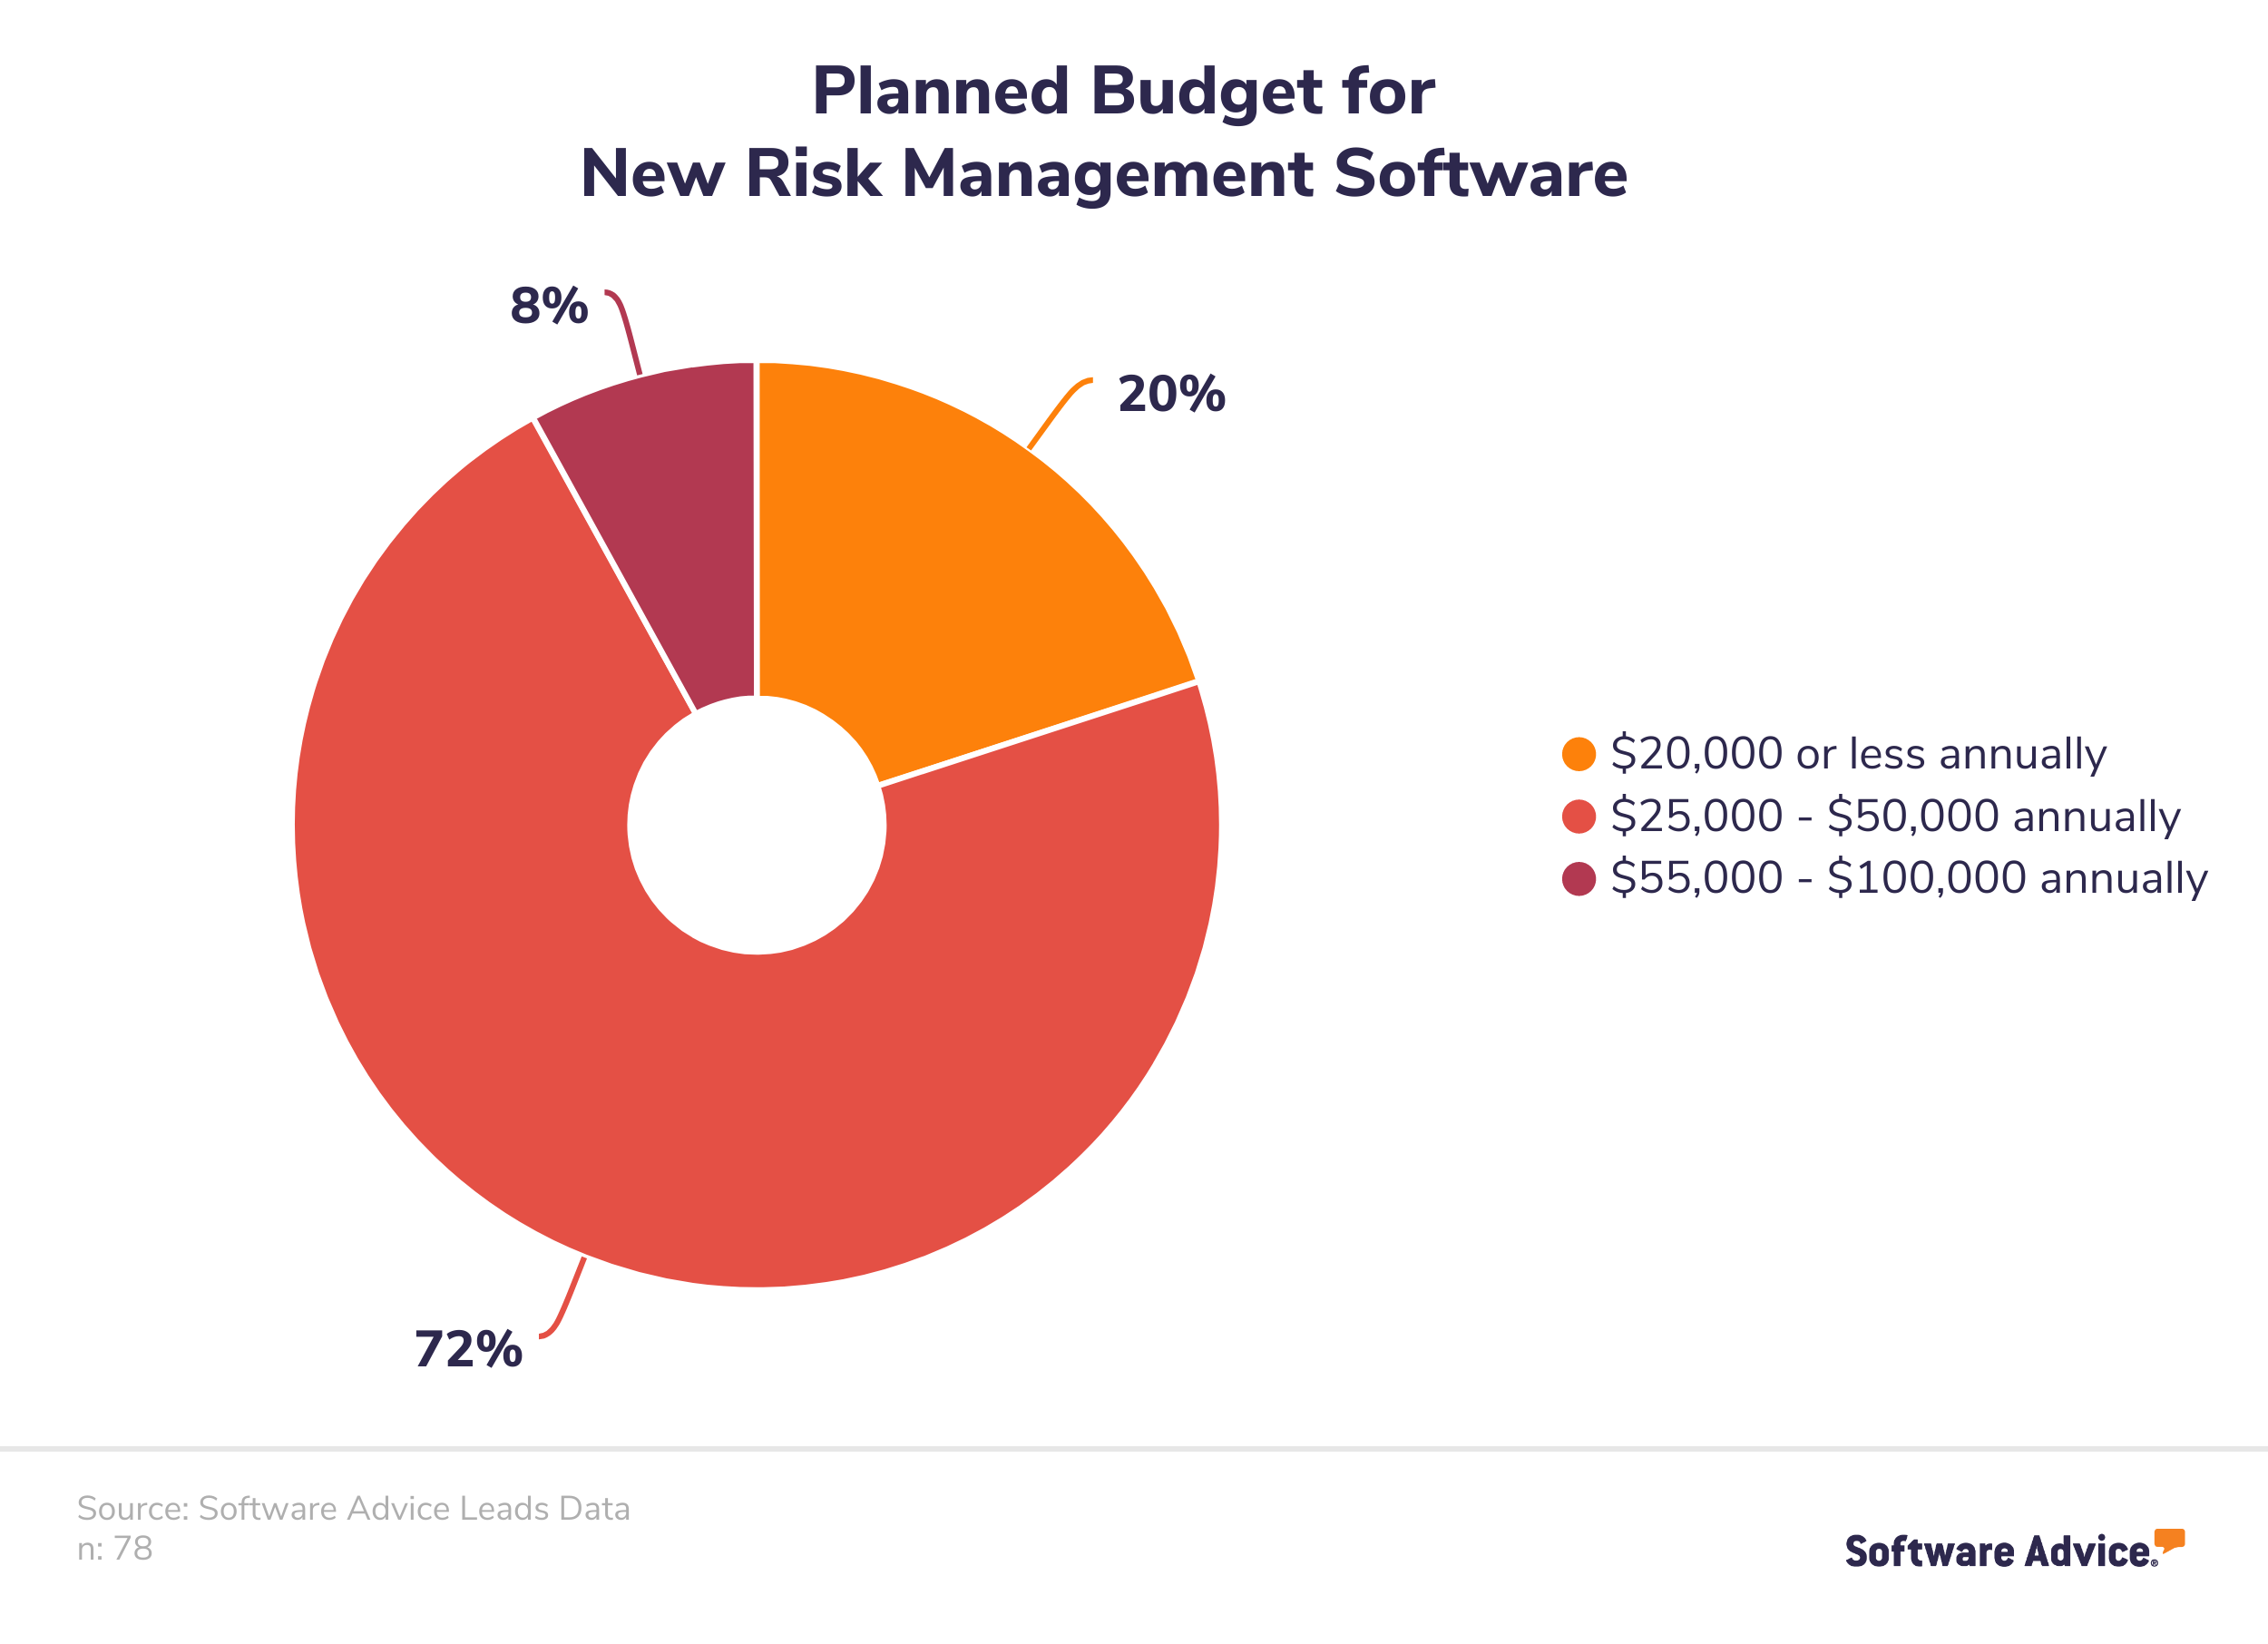 small-business-planned-budget-for-new-risk-management-software